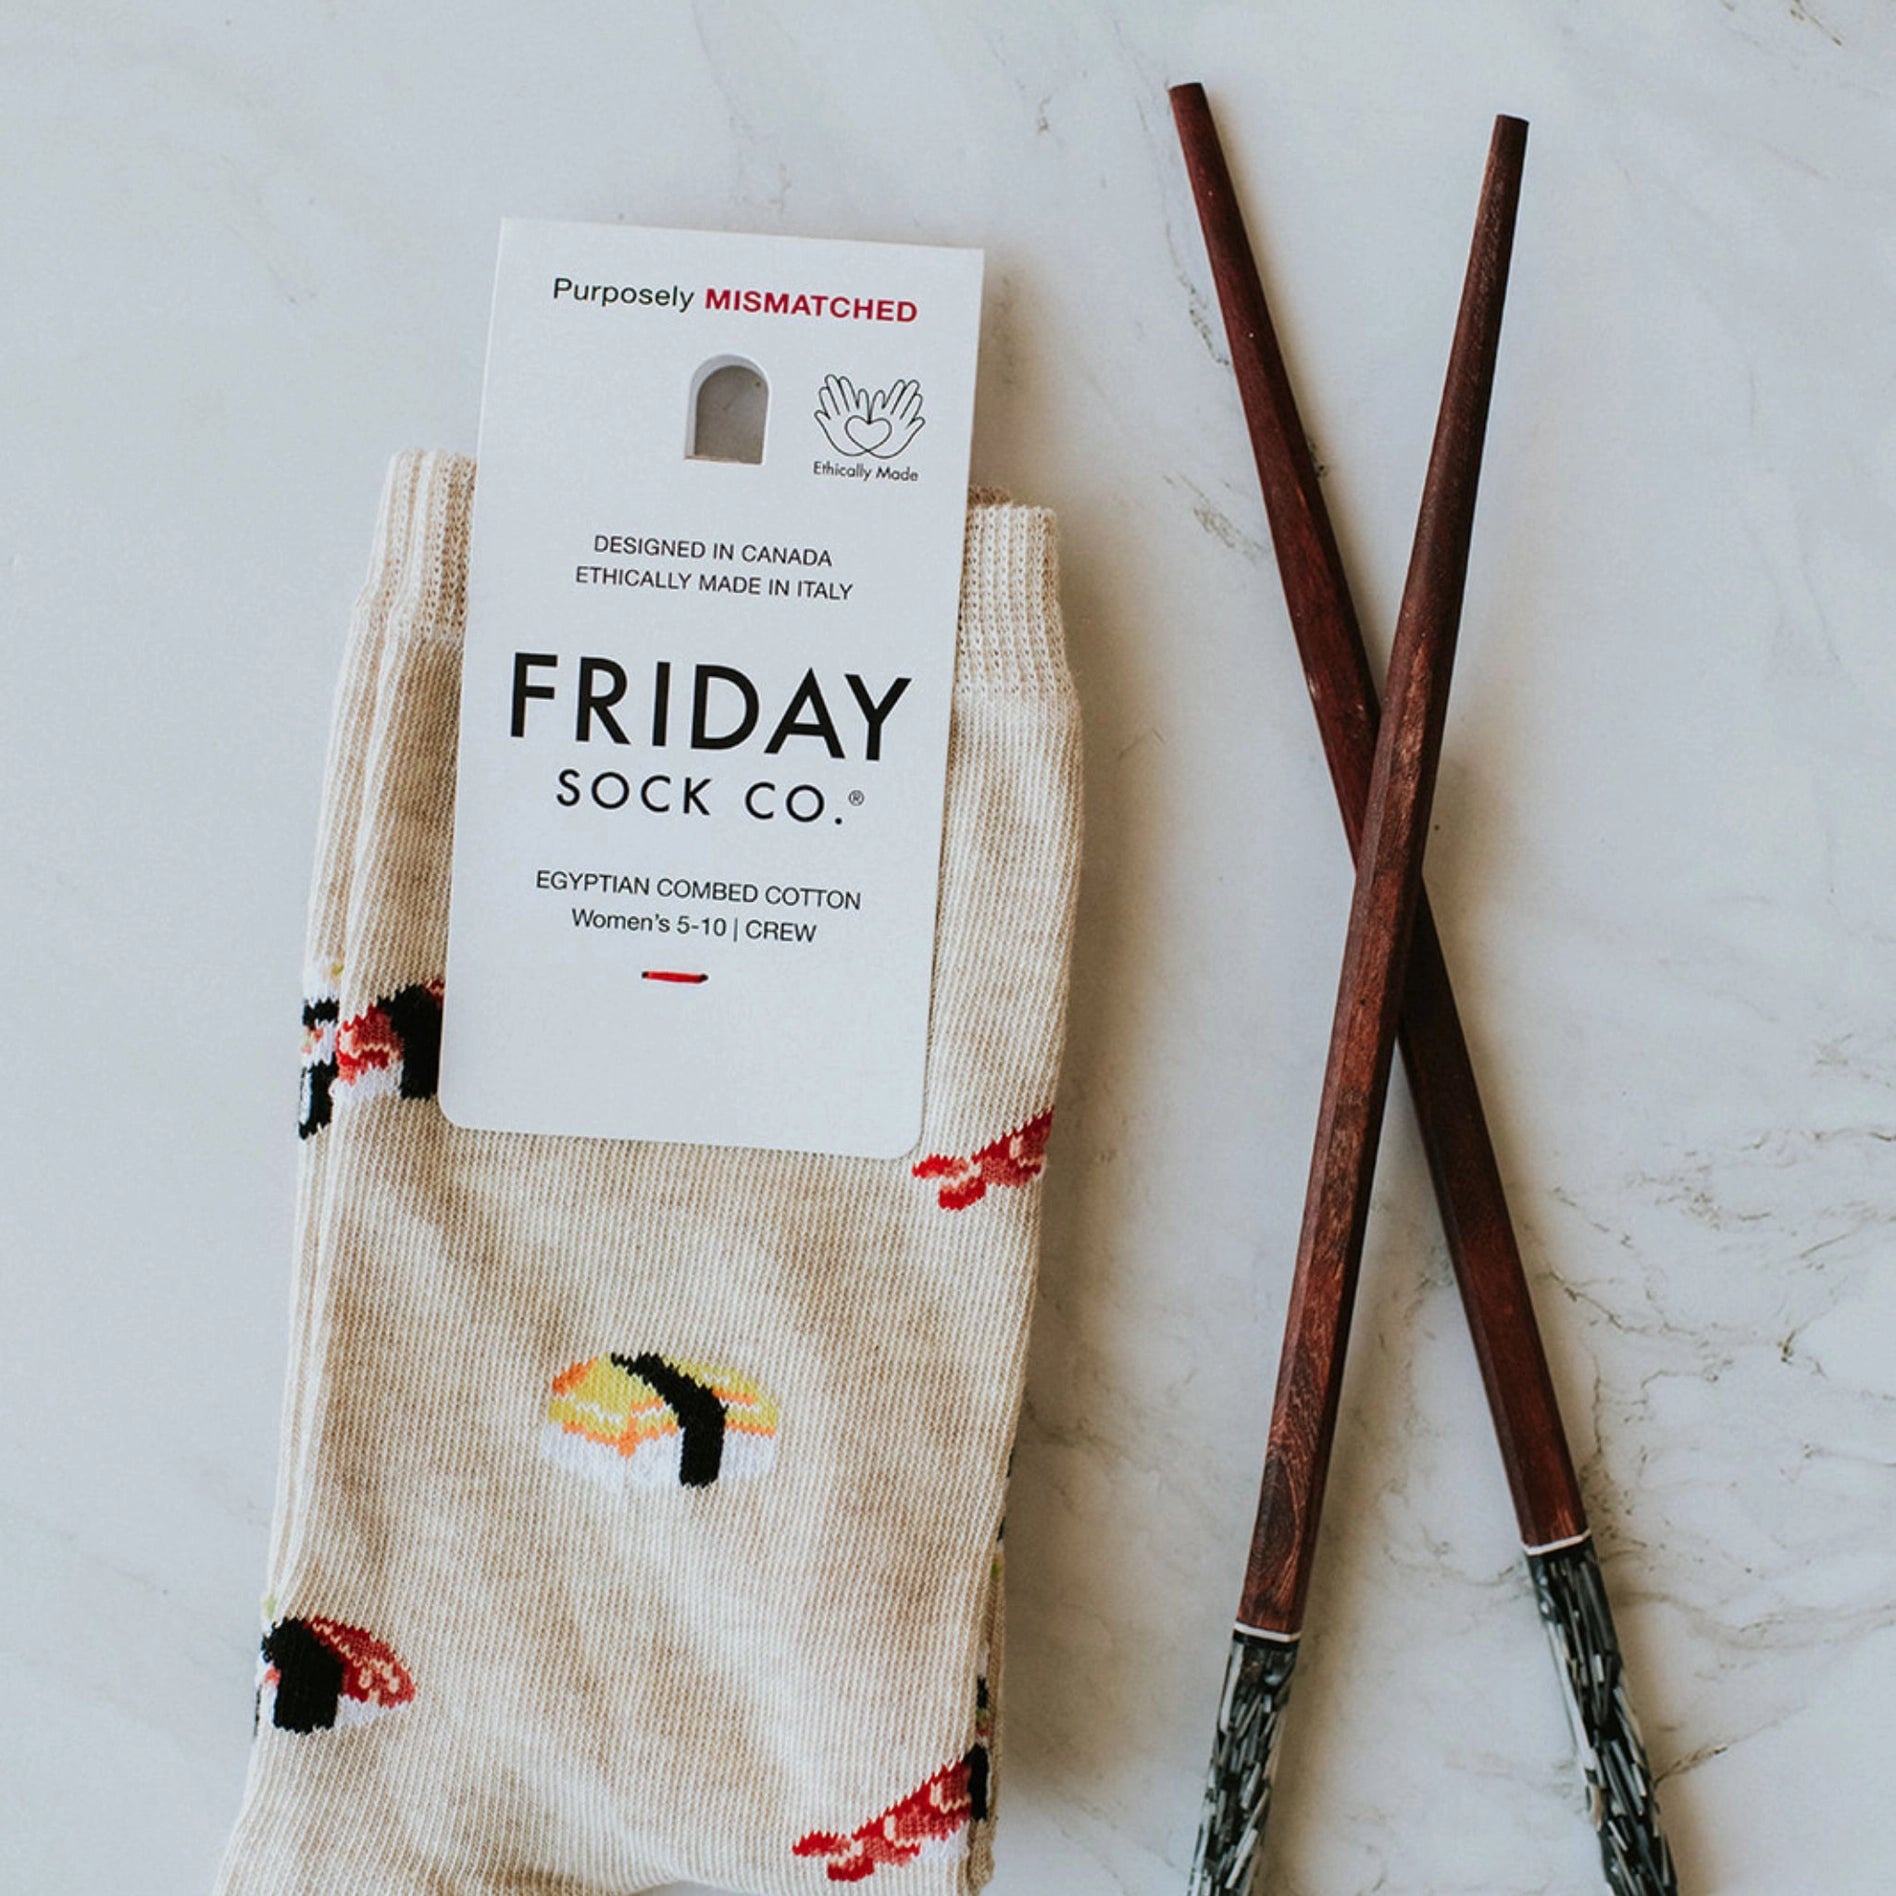 Friday socks Sushi print with chopsticks next to it for decor.